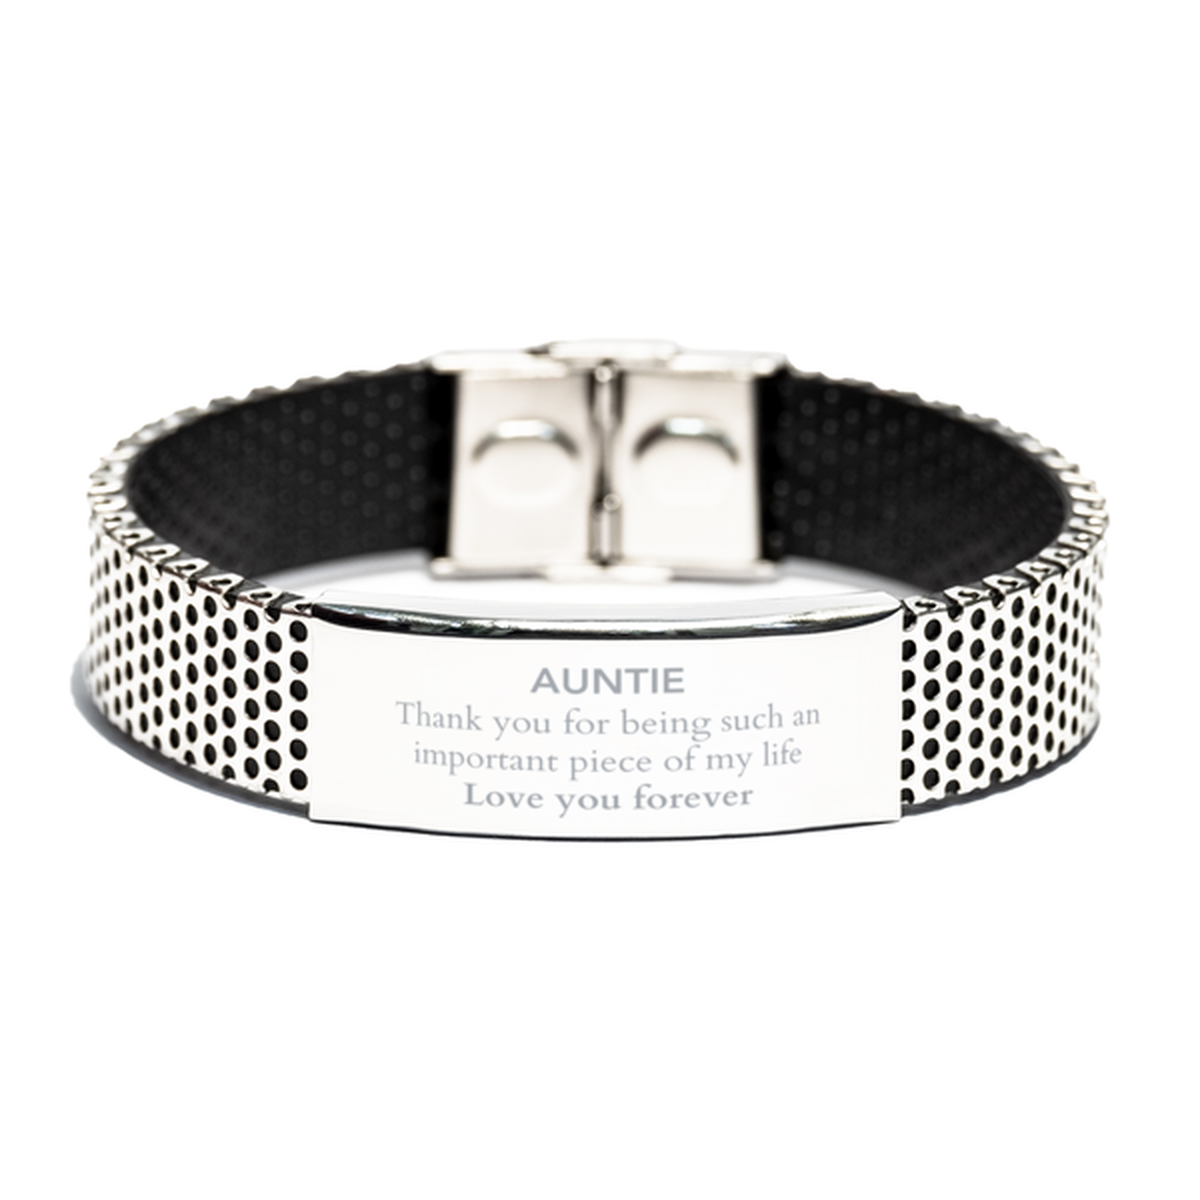 Appropriate Auntie Stainless Steel Bracelet Epic Birthday Gifts for Auntie Thank you for being such an important piece of my life Auntie Christmas Mothers Fathers Day